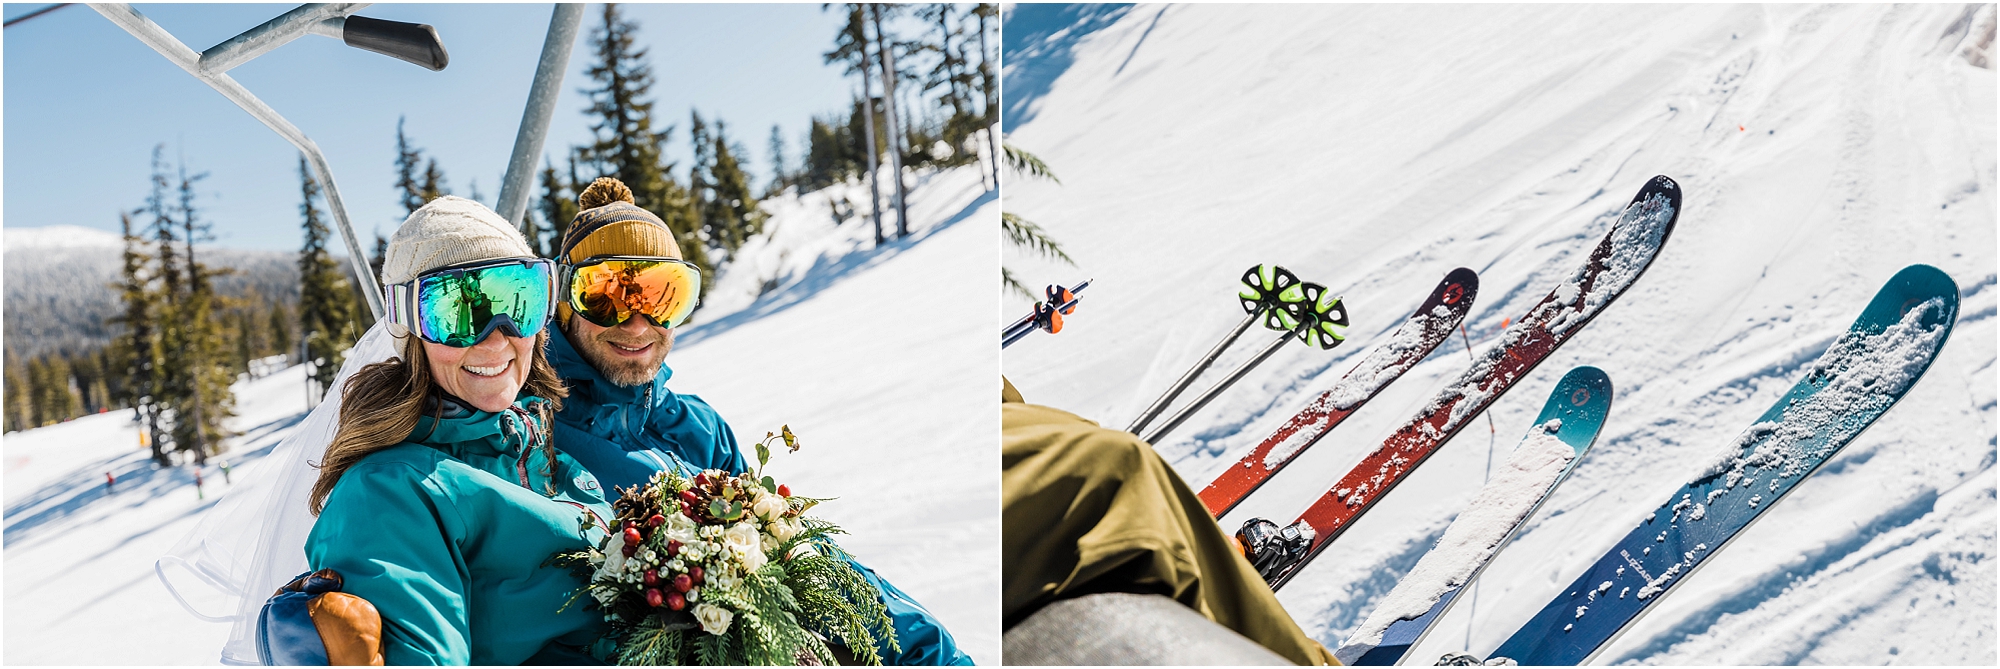 Riding the Pine Martin chairlift with a bride and groom at Mt Bachelor ski resort in Bend, Oregon. | Erica Swantek Photography